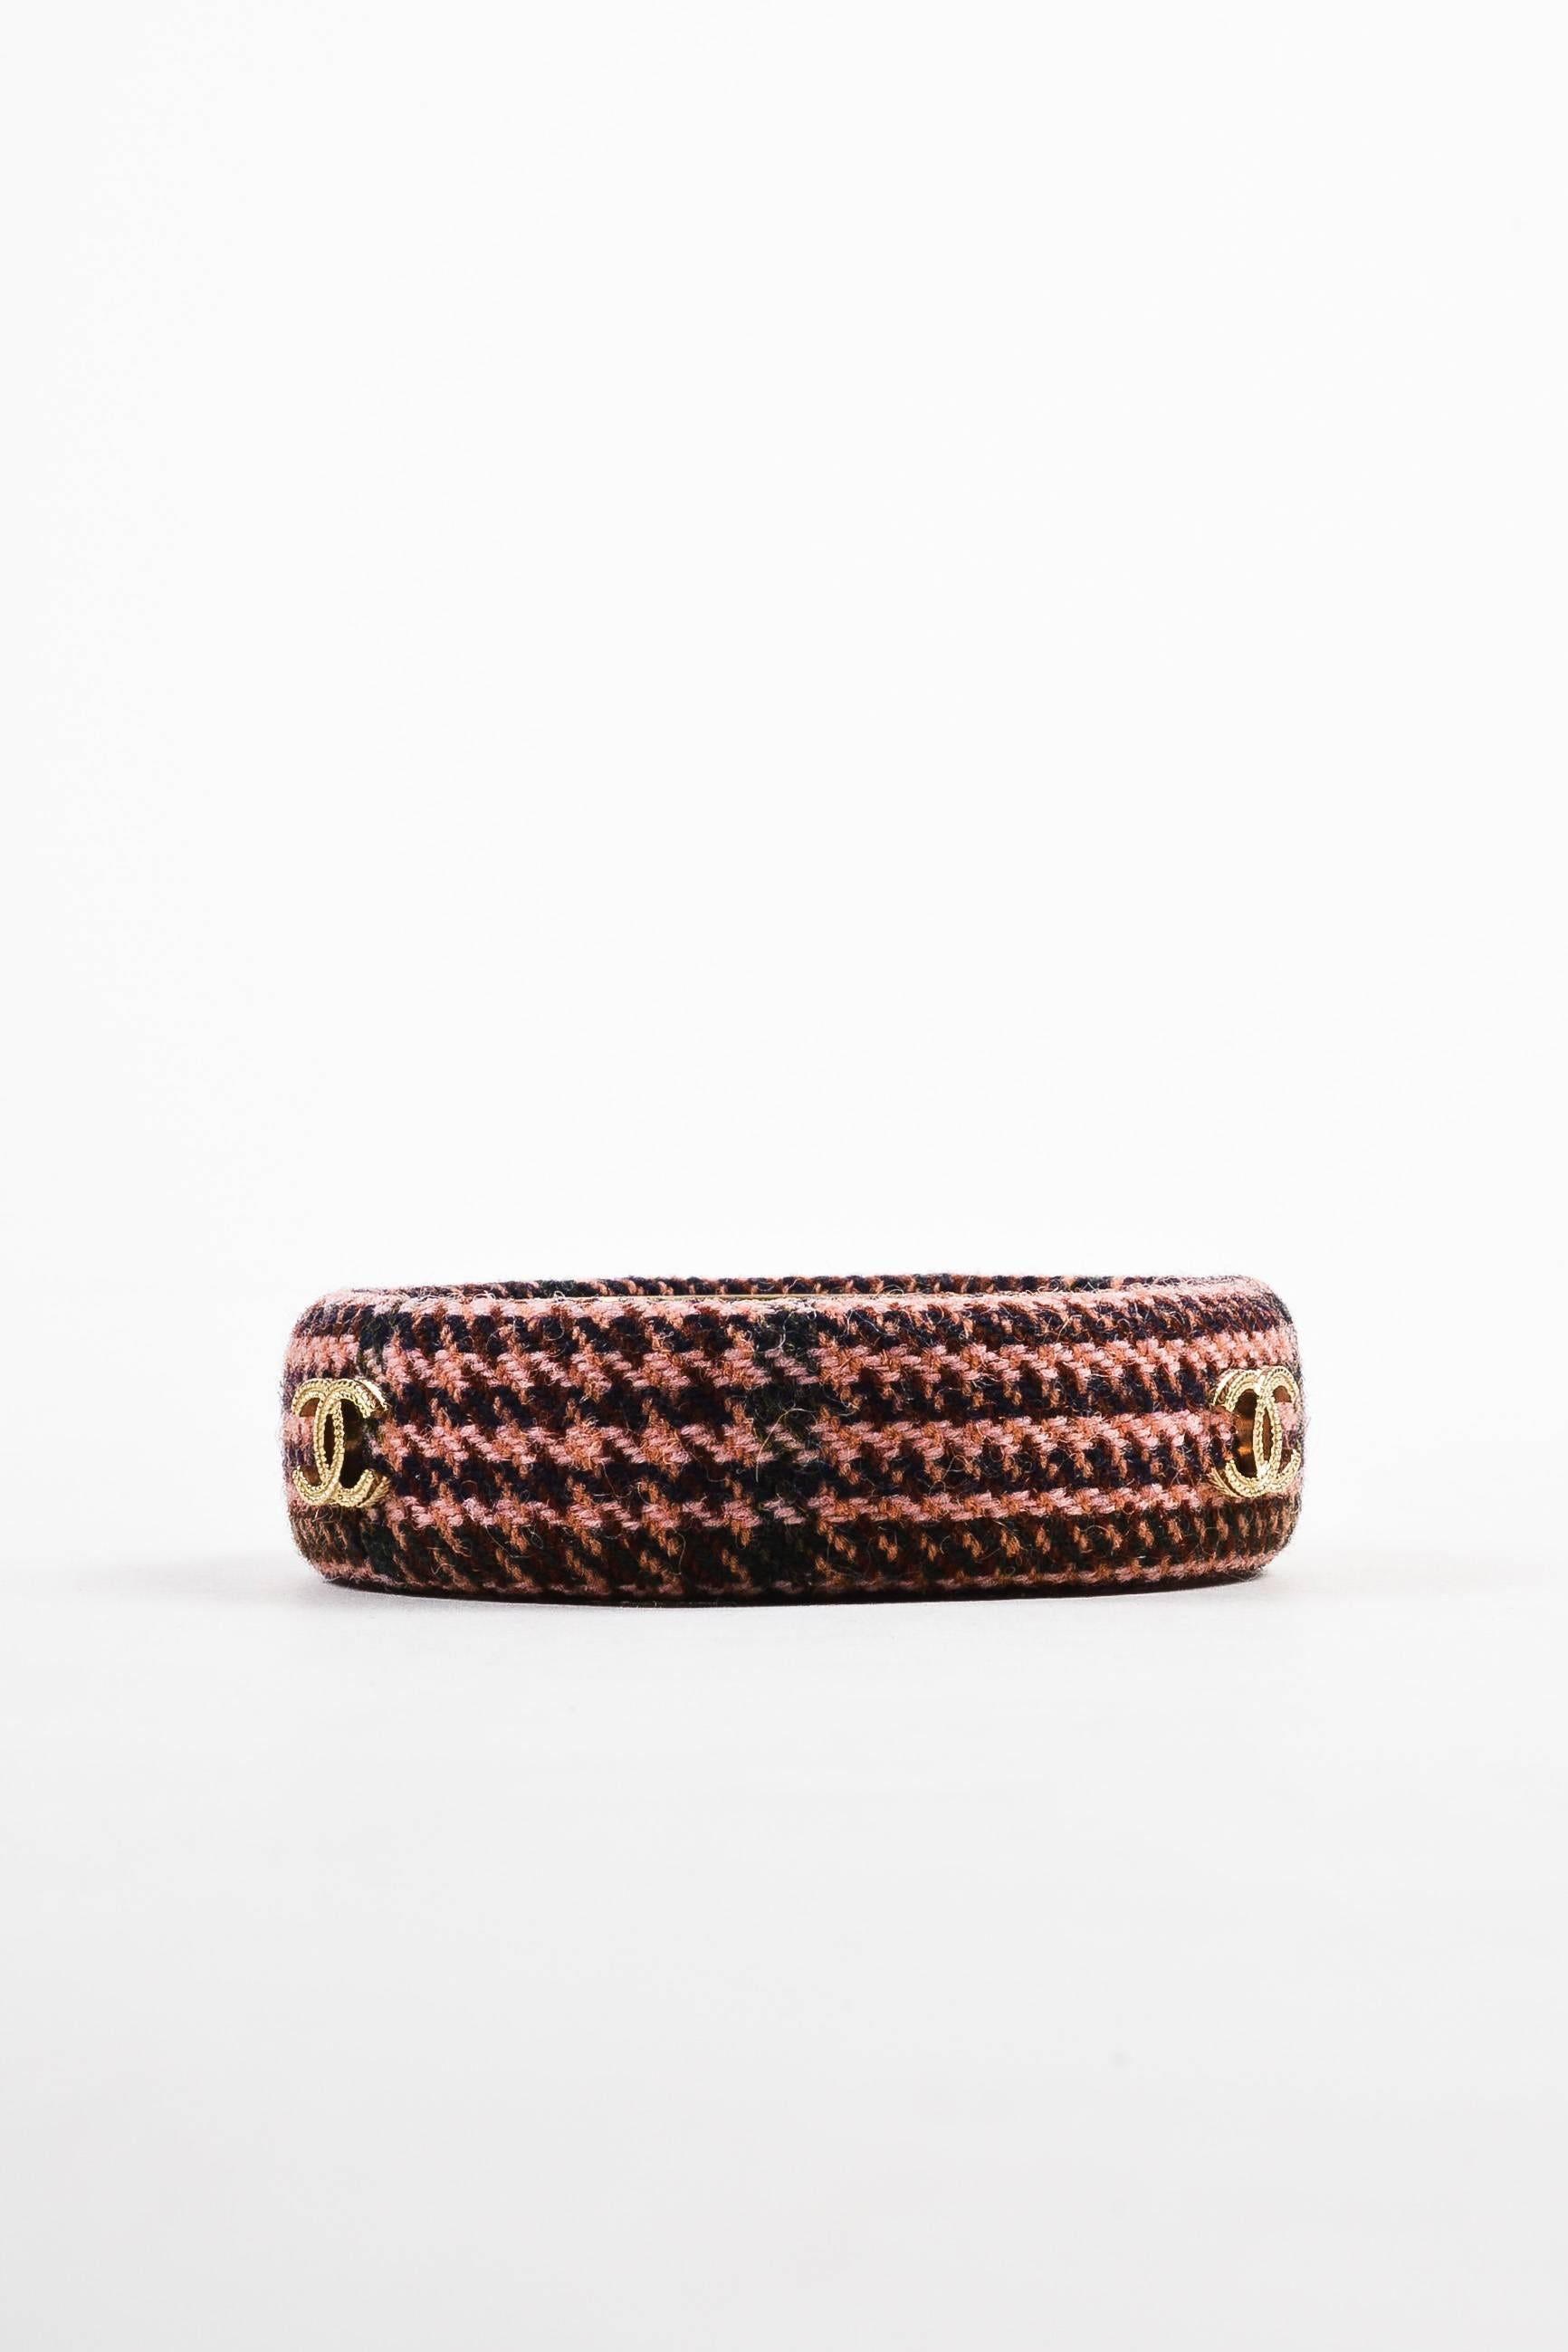 	
From the Fall 2013 collection. Retailed for $650. This stylish bangle pays homage to Chanel's iconic tweed jackets. Constructed of woven wool in shades of pink and brown. Three gold-tone metal 'CC' logos adorn exterior. Smooth metal